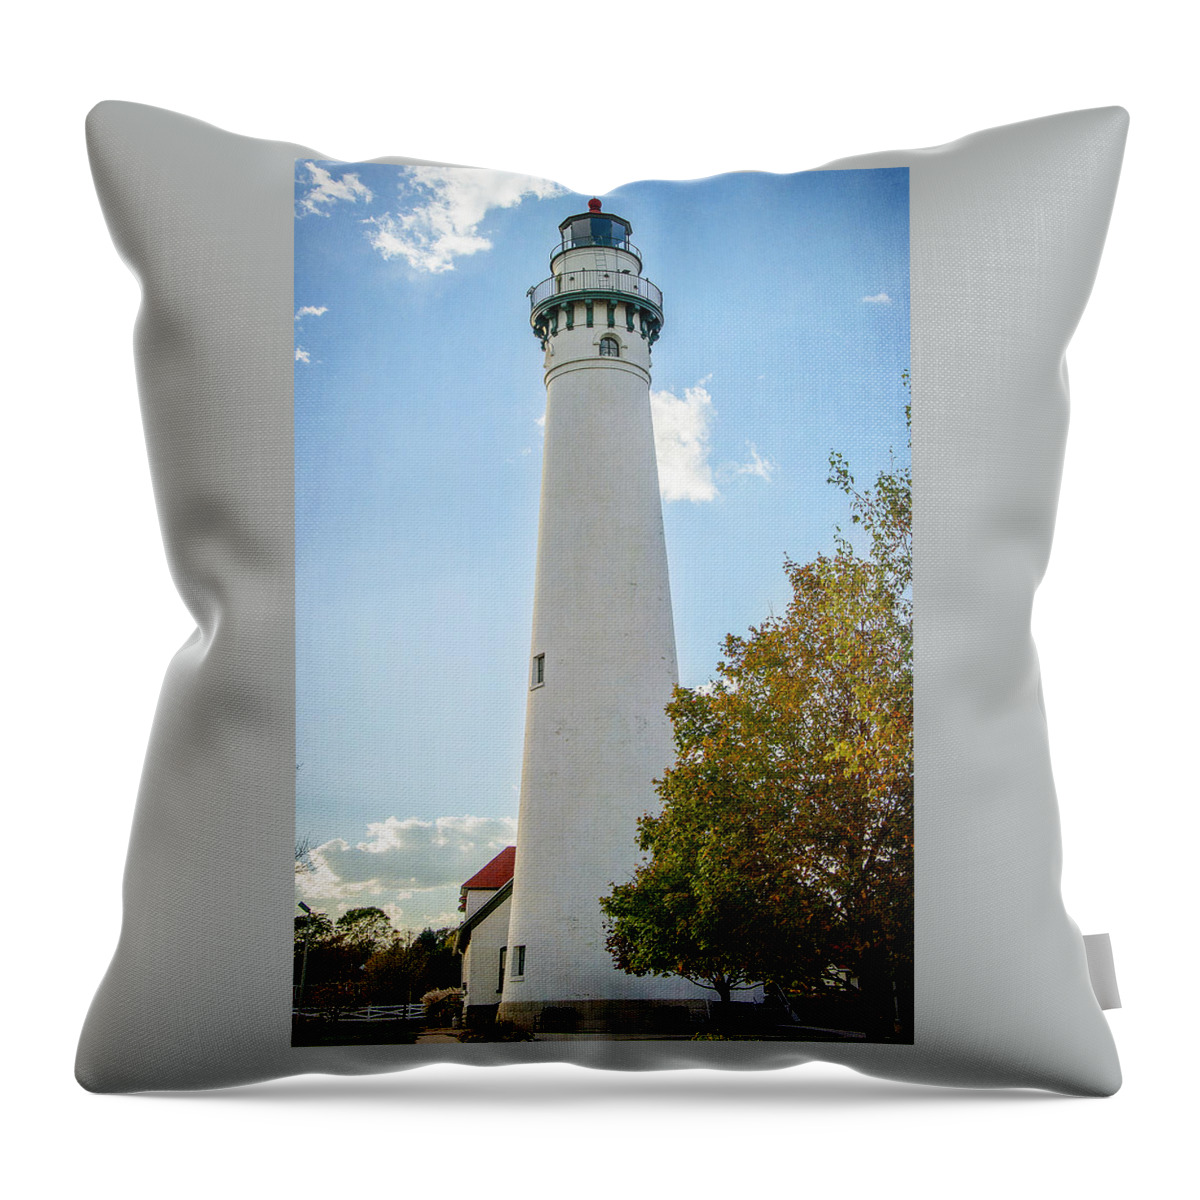 Wind Point Lighthouse 3 Throw Pillow featuring the photograph Wind Point Lighthouse 3 by Susan McMenamin